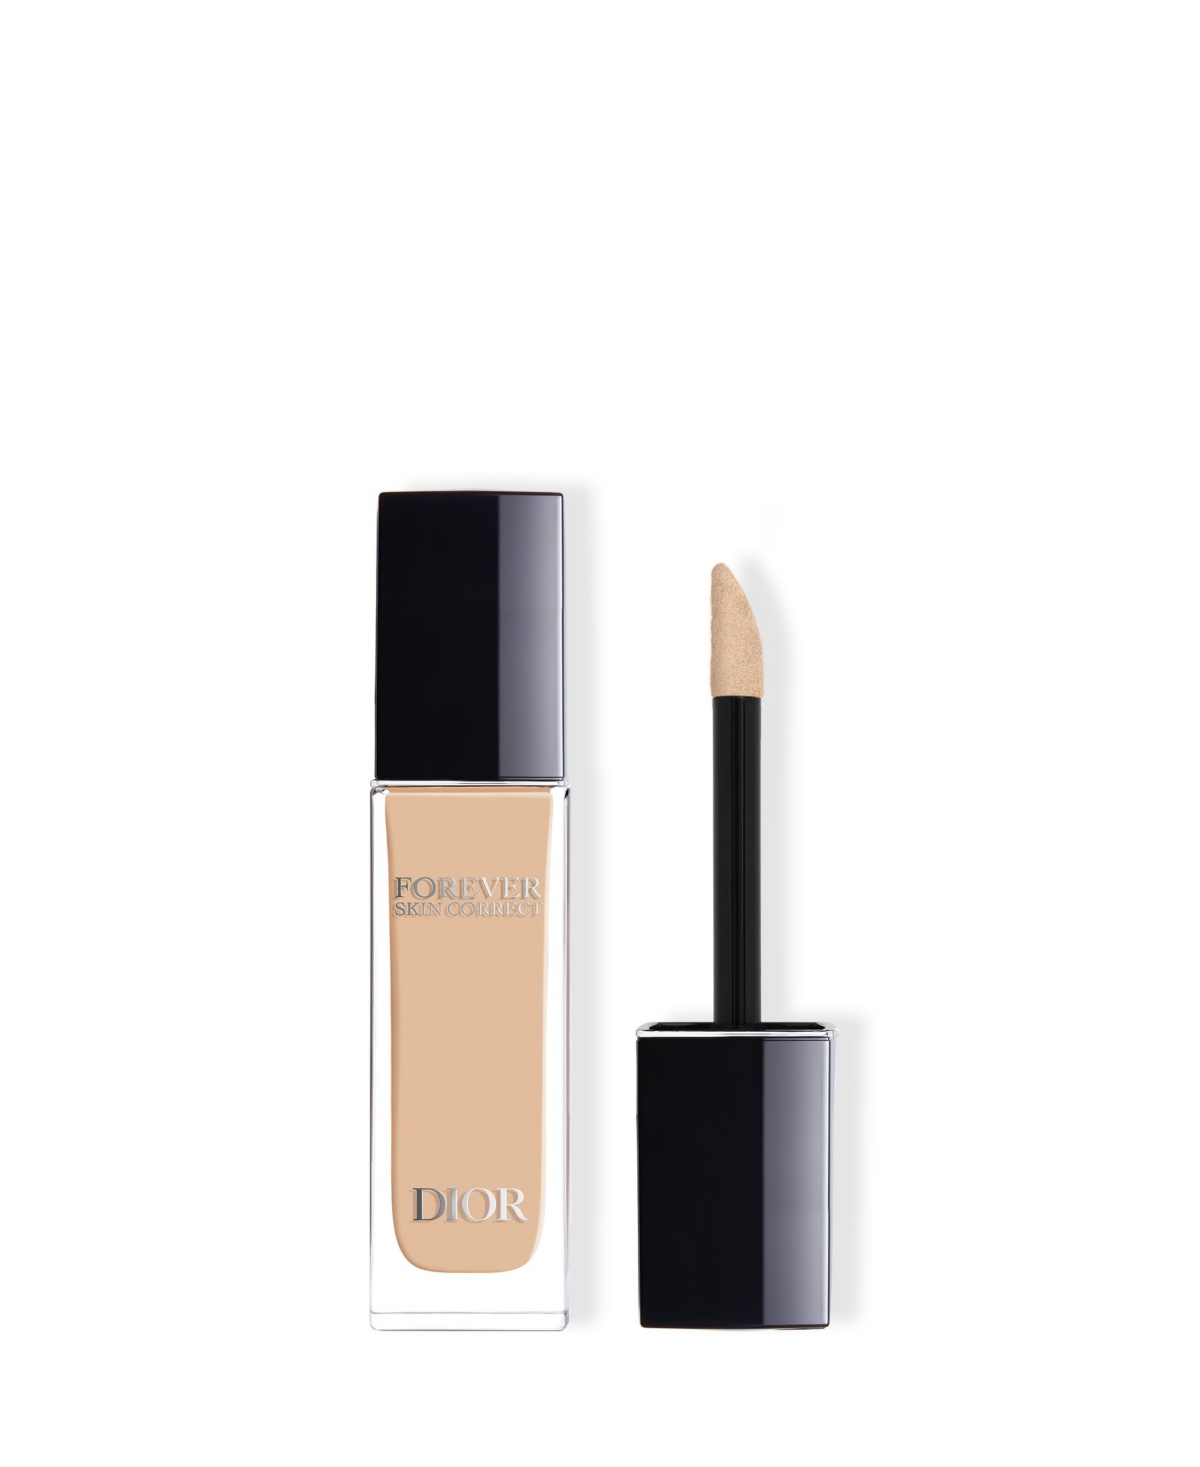 Dior Forever Skin Correct Full-coverage Concealer In N Neutral (light Skin With Neutral Bei